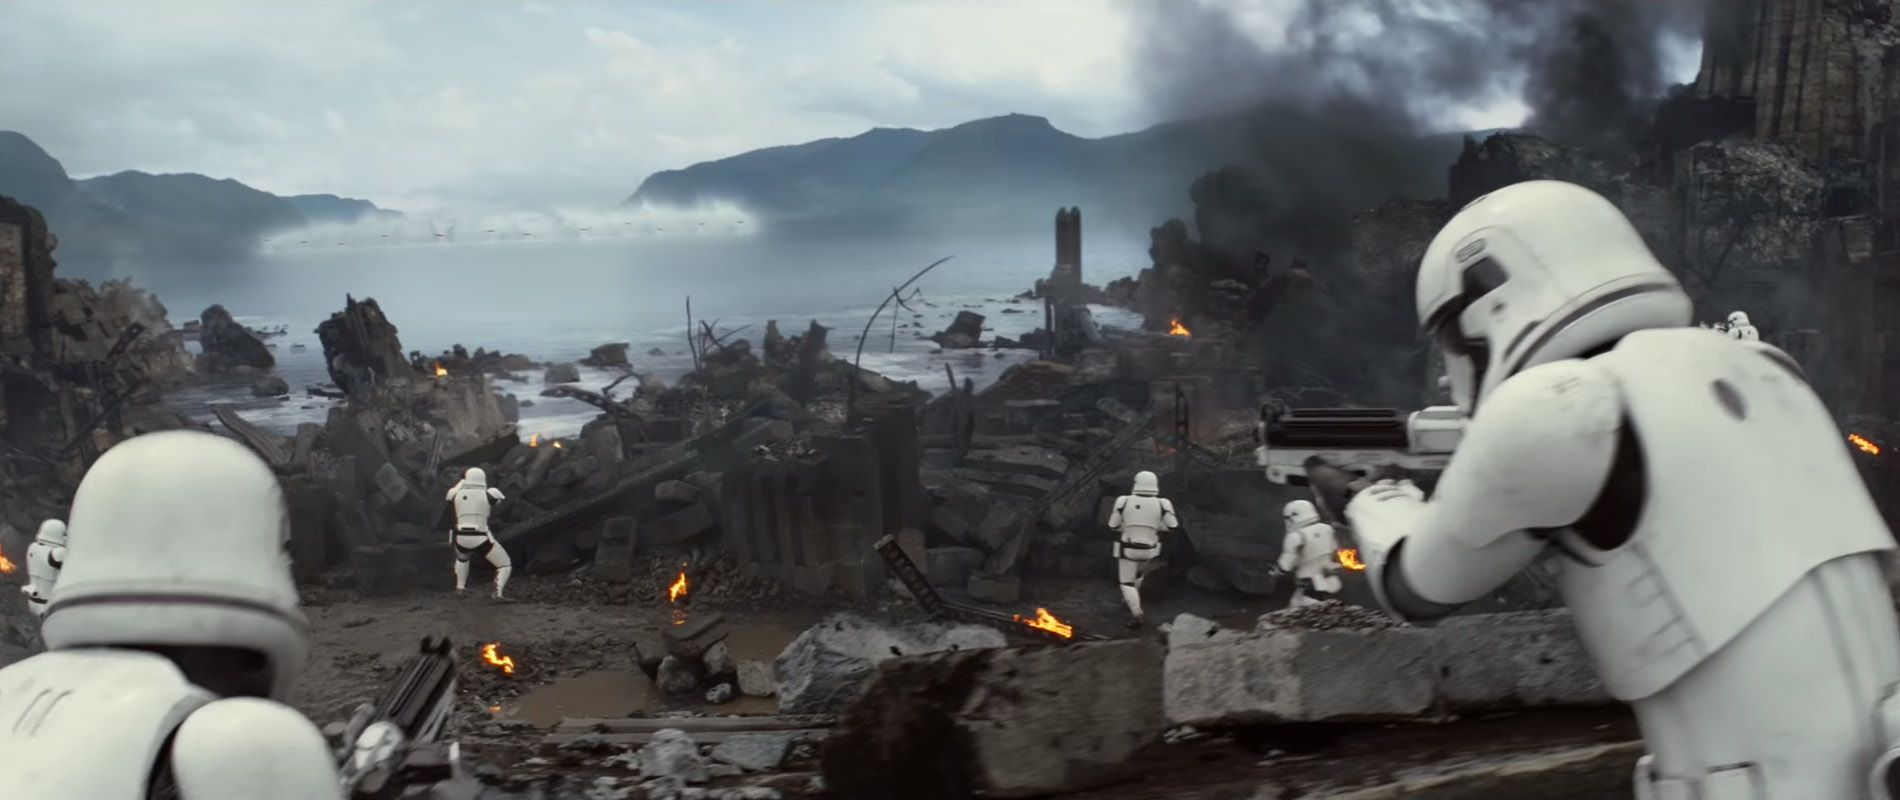 Star Wars 7 Trailer #3 - X-Wings Attack Stormtroopers